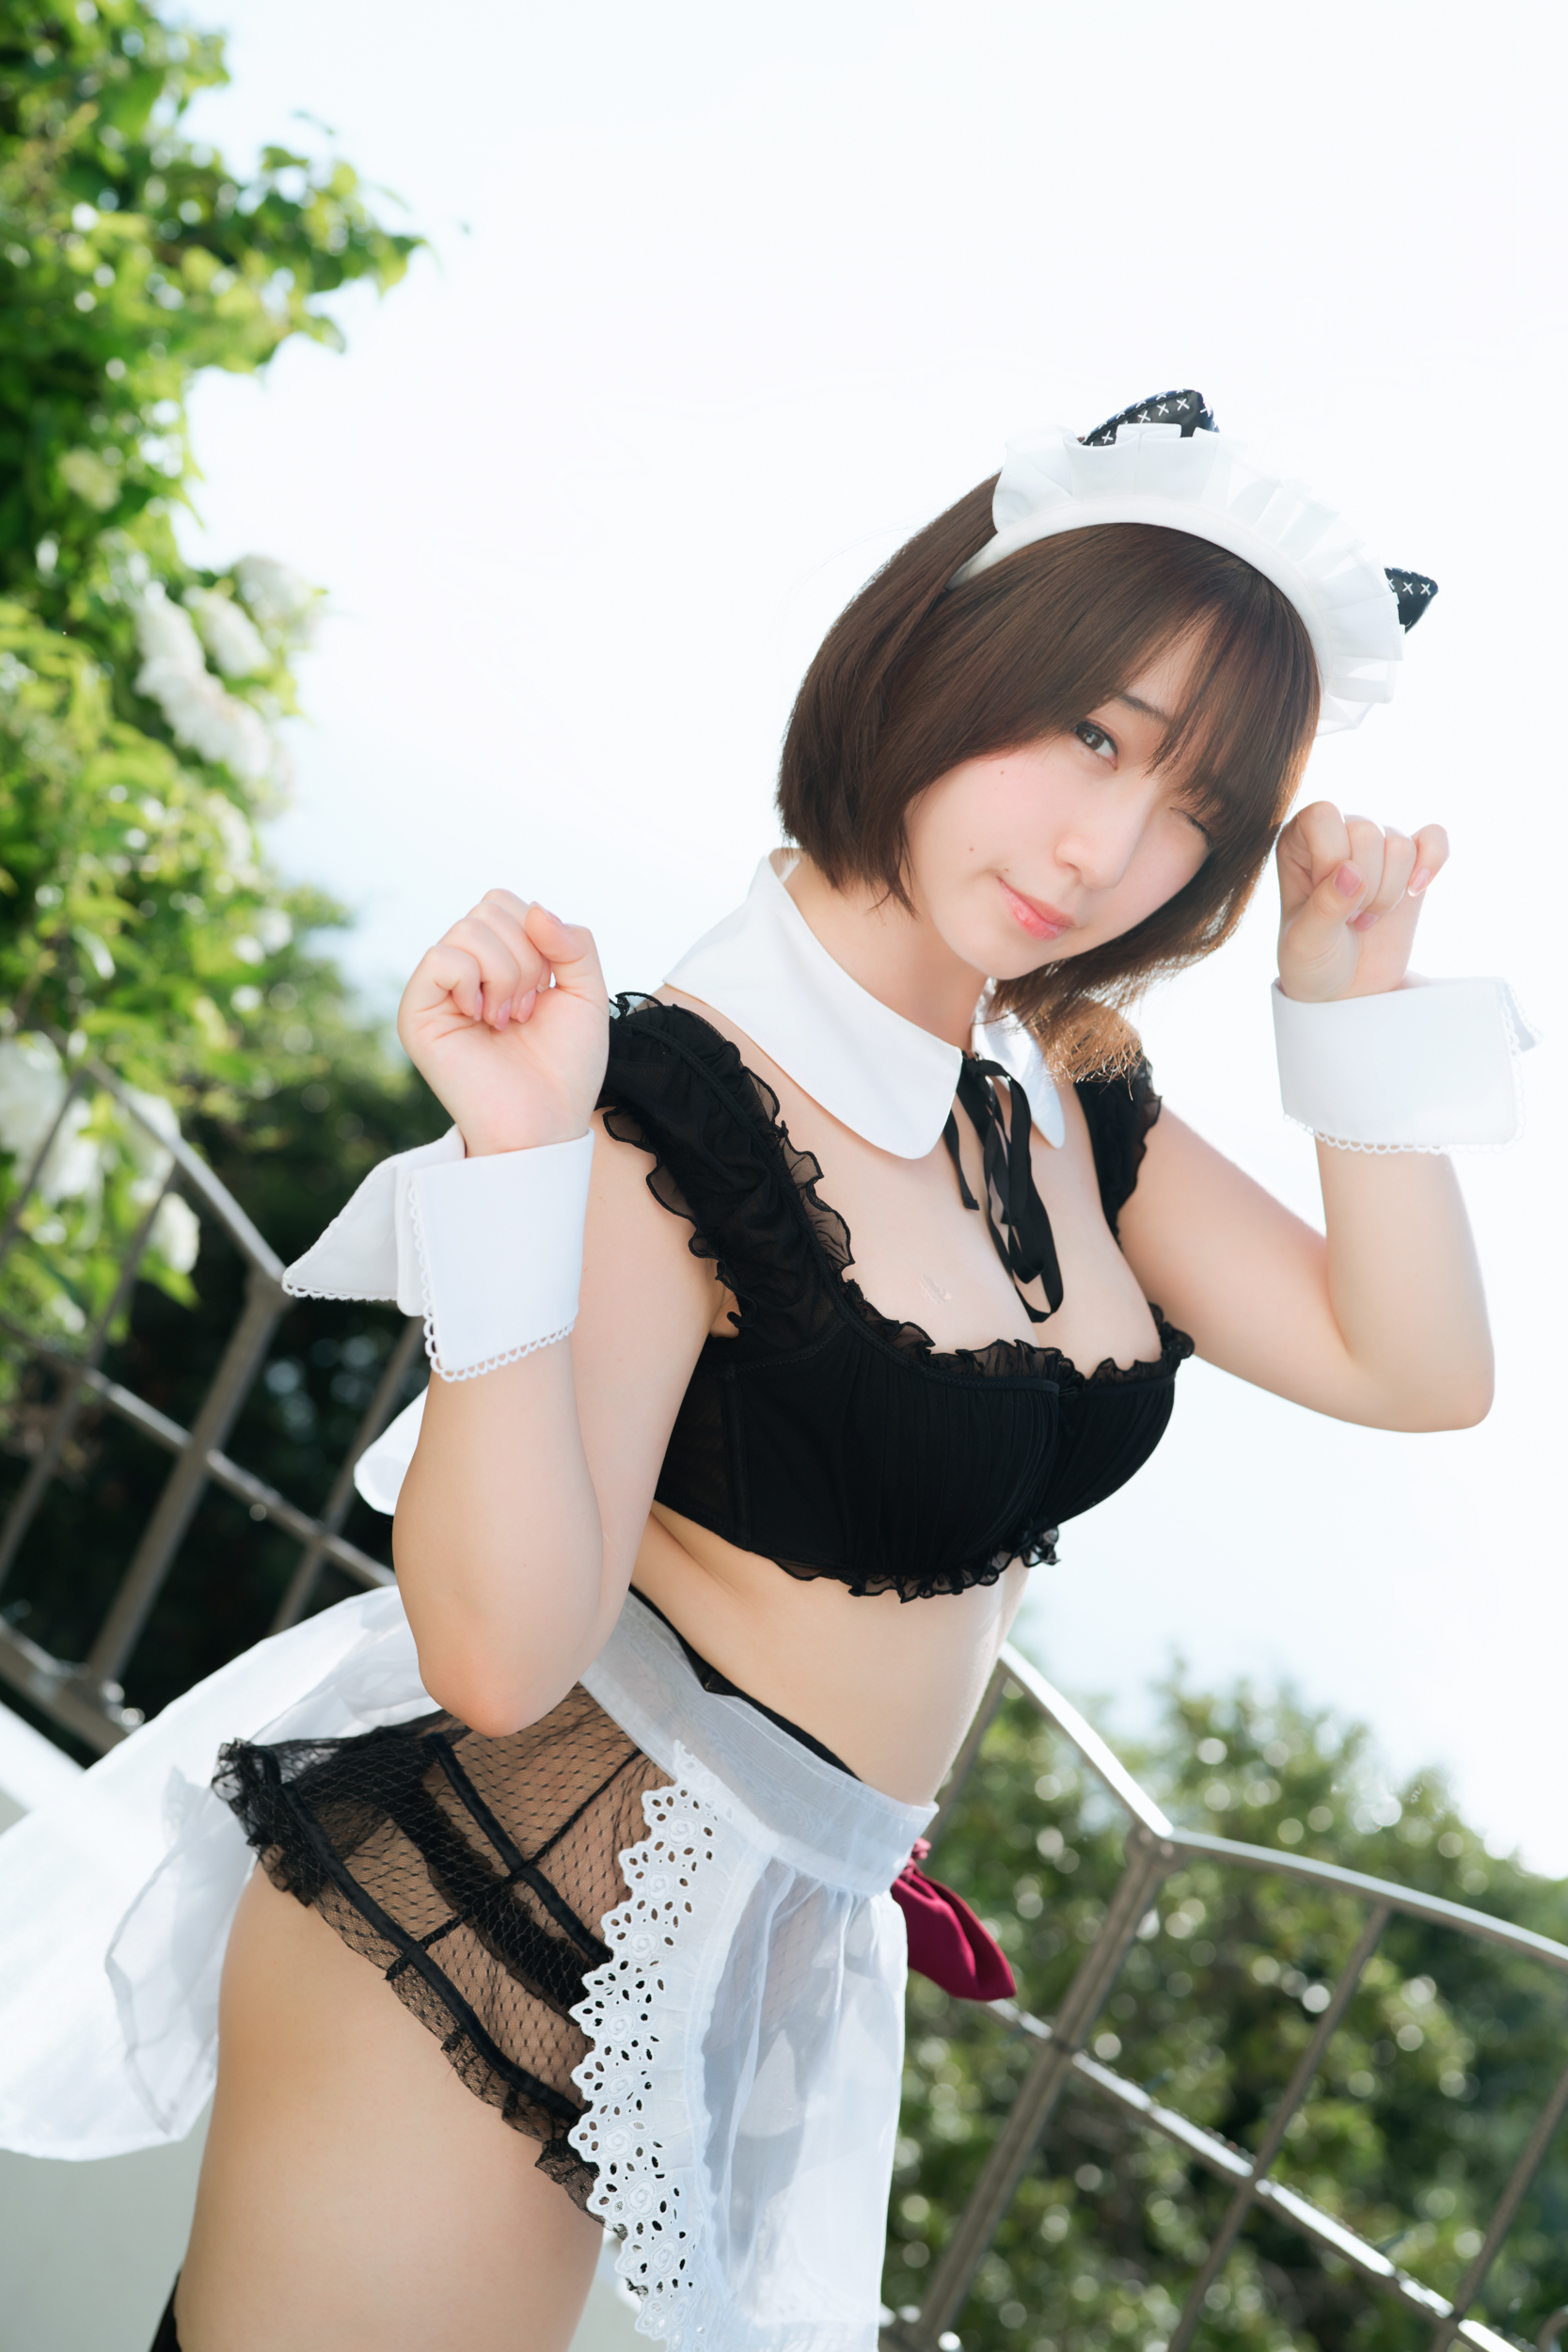 This is the sample picture from Moe Iori｜伊織もえ - Is the maid you are looking for post. Click here to see image full size.